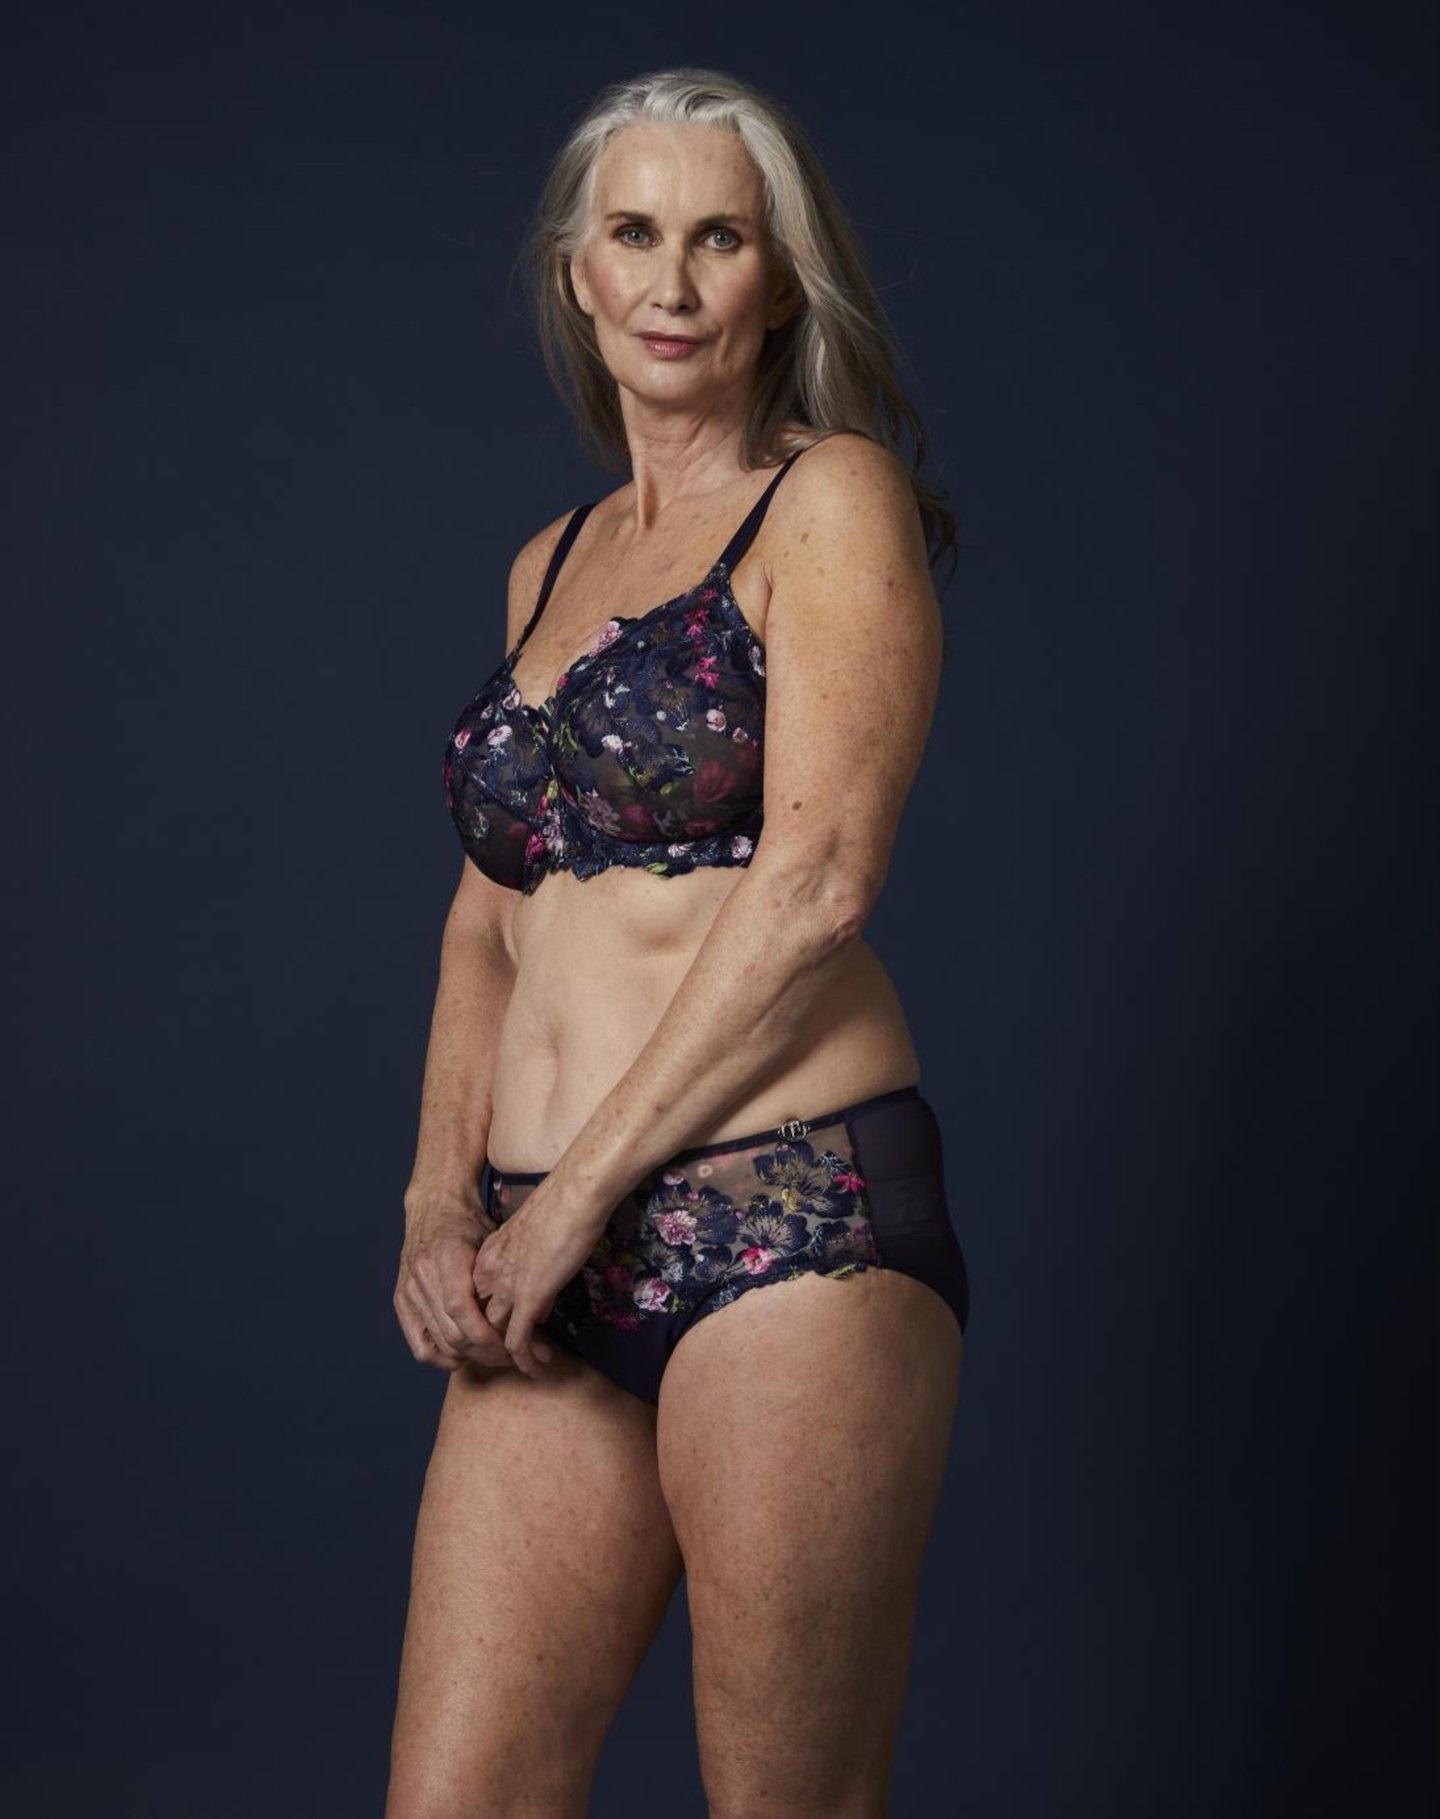 The 59-year-old lingerie model saying It's OK not to be perfect